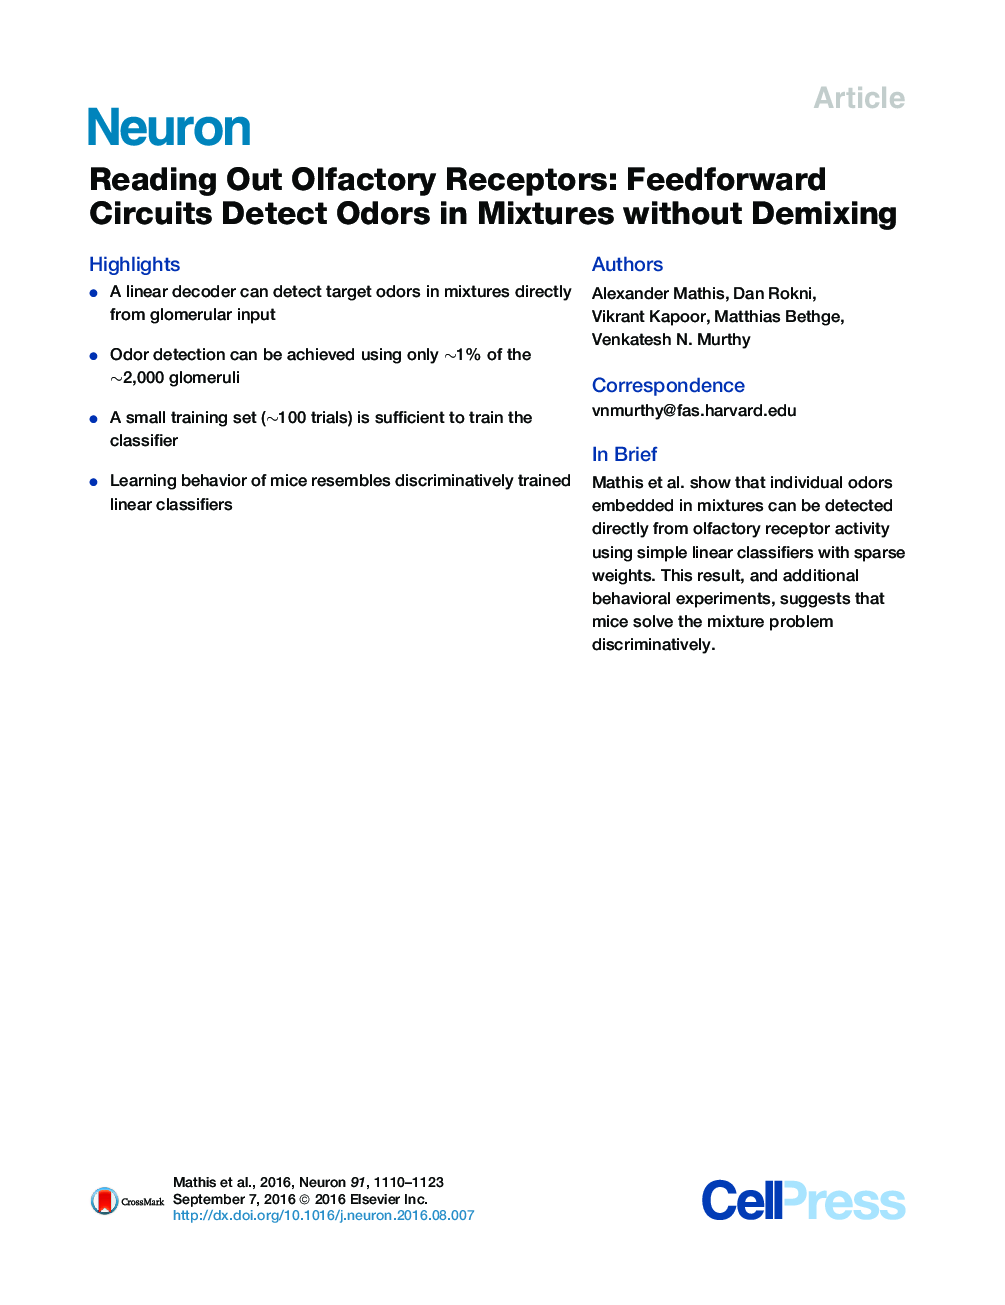 Reading Out Olfactory Receptors: Feedforward Circuits Detect Odors in Mixtures without Demixing